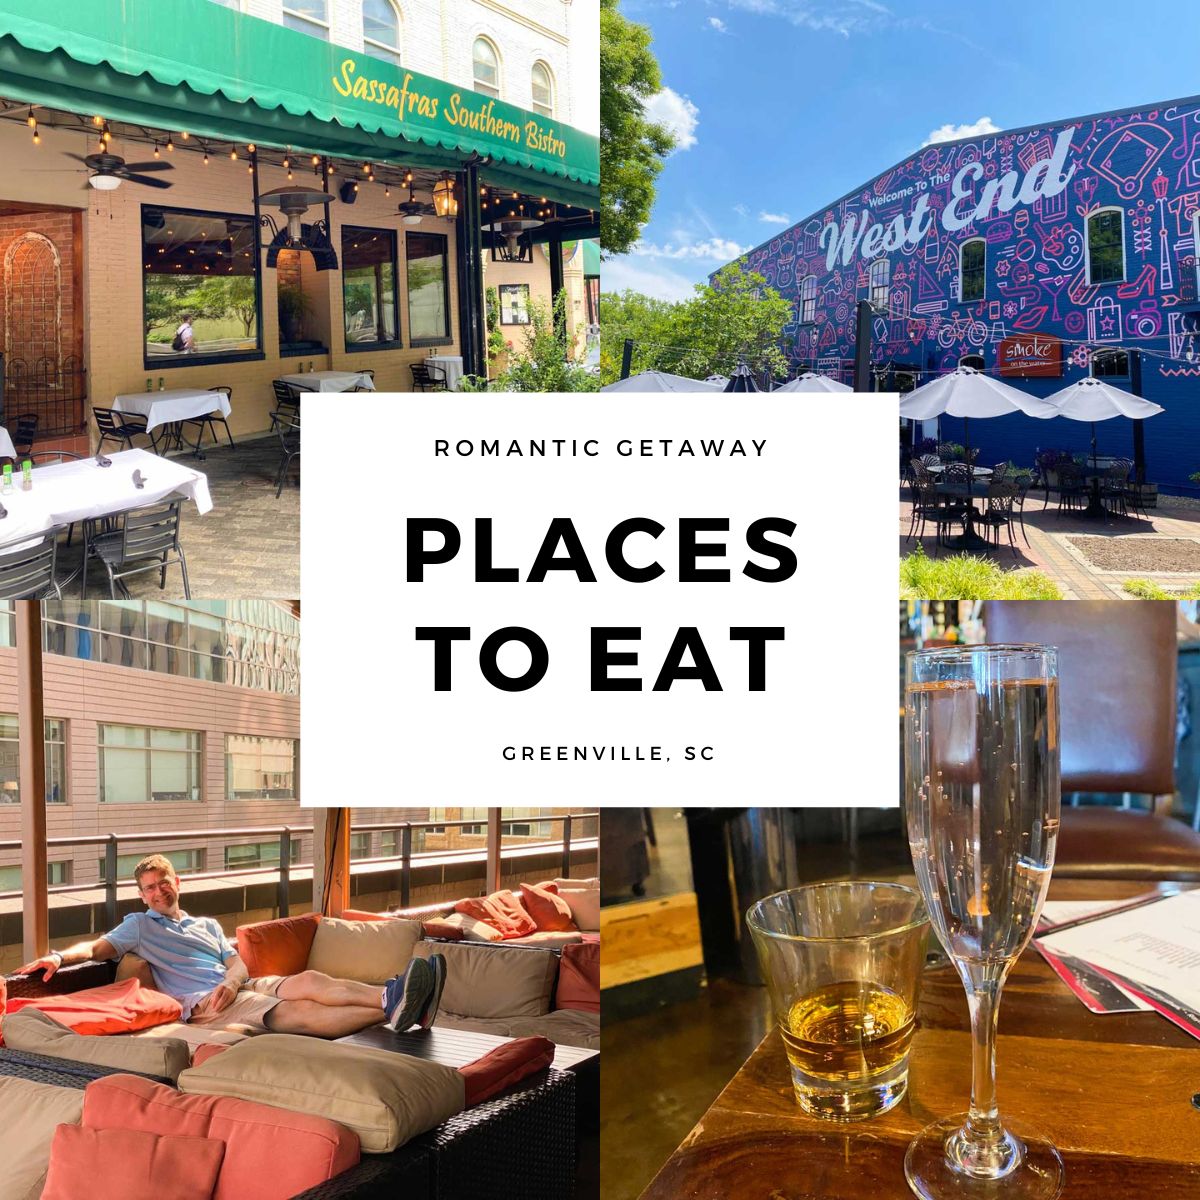 A photo collage of some of the best places to eat.